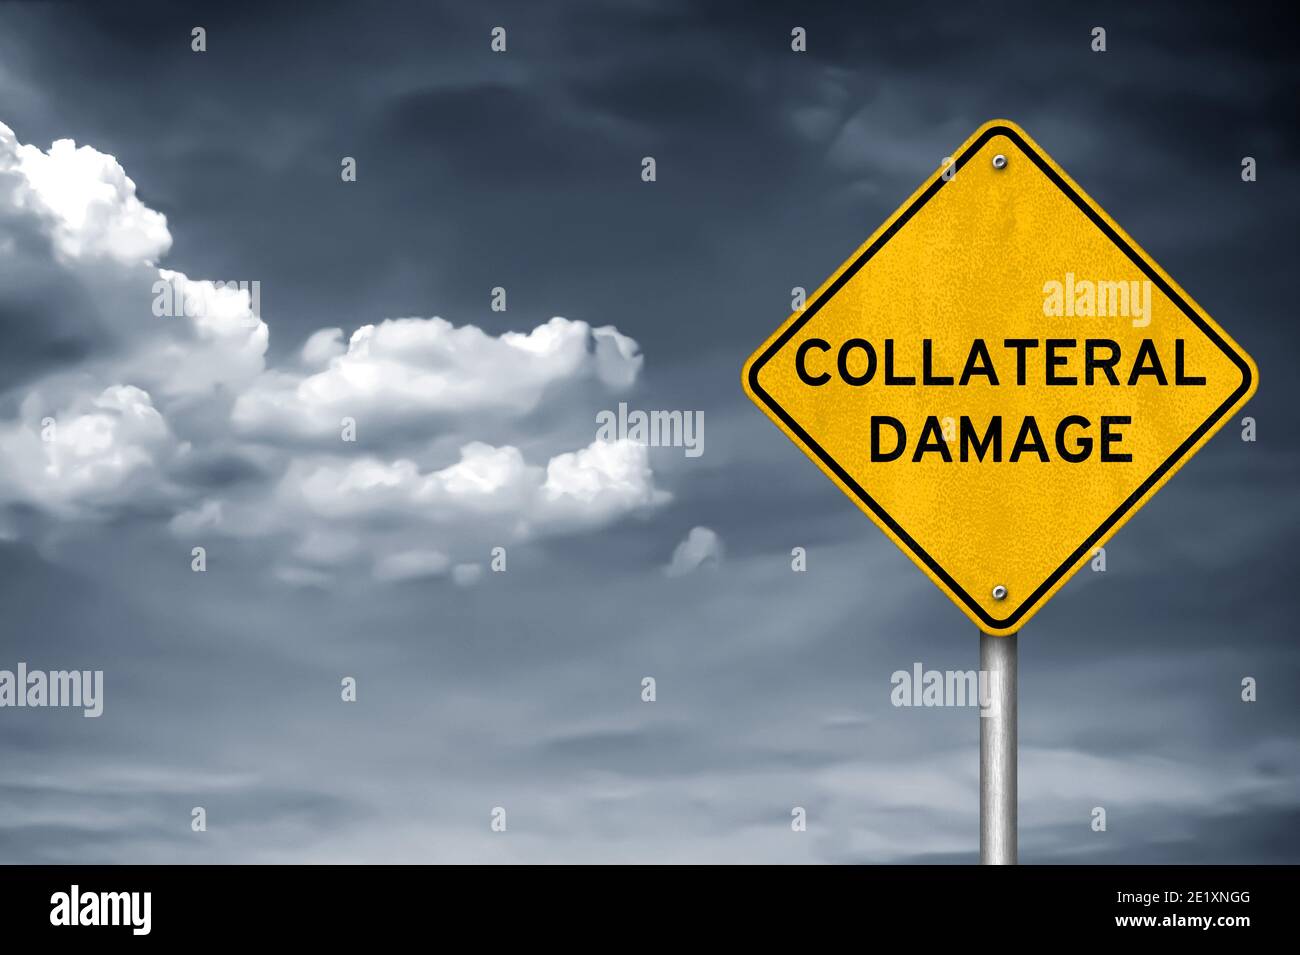 Collateral Damage Stockfoto